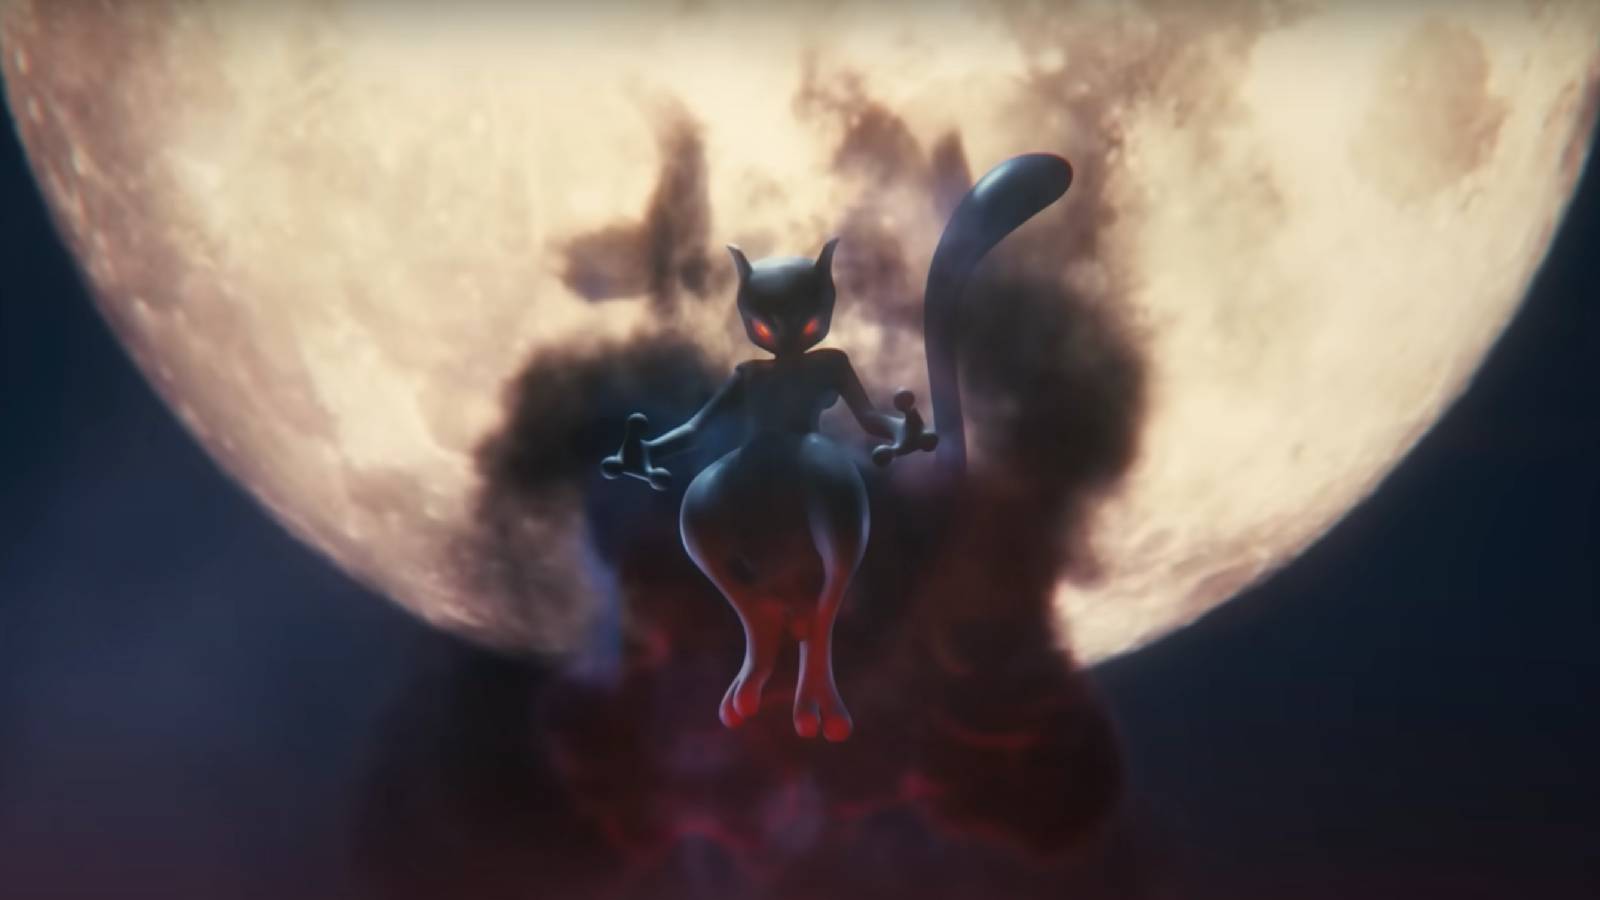 The Pokemon Shadow Mewtwo appears in front of the moon, shrouded in a dark cloud